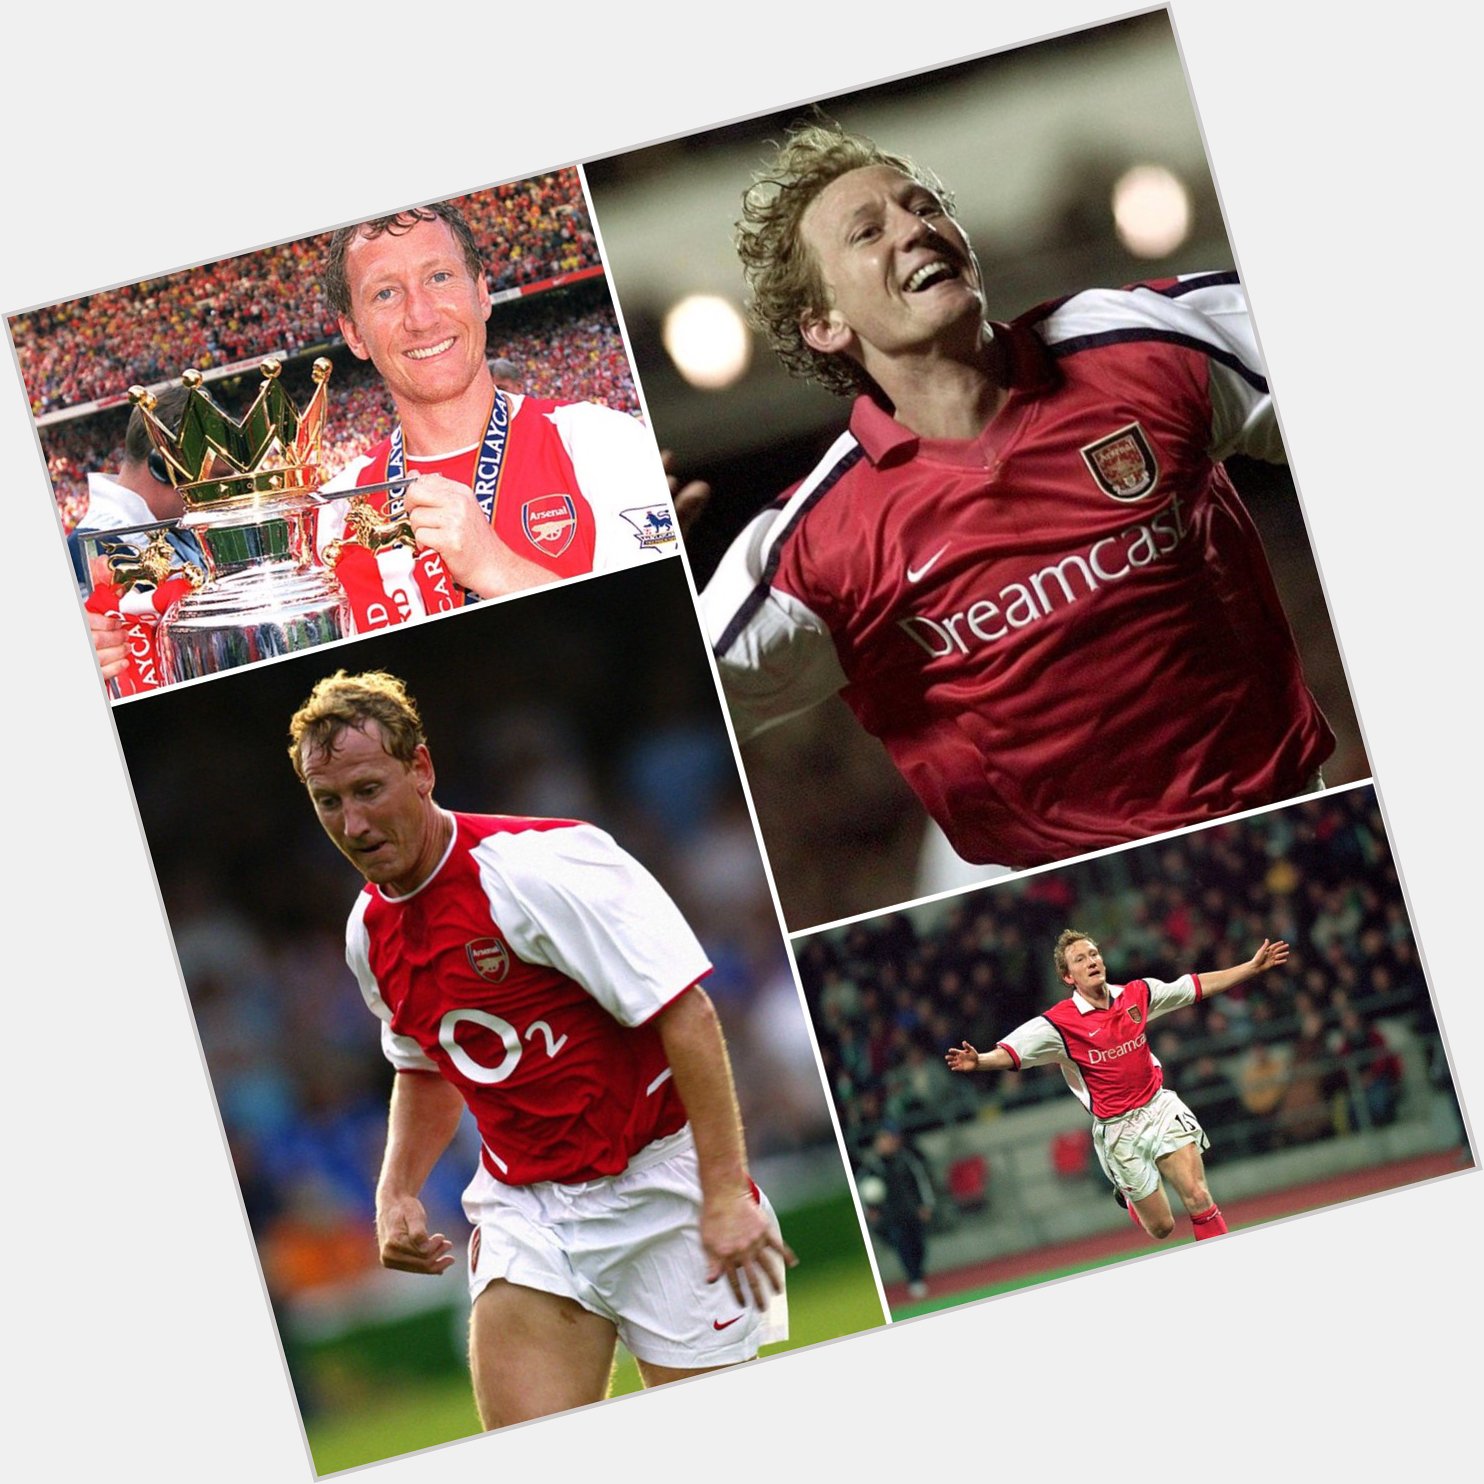 44 years old 384 appearances   25 goals  9 assists  Happy birthday Ray Parlour! 